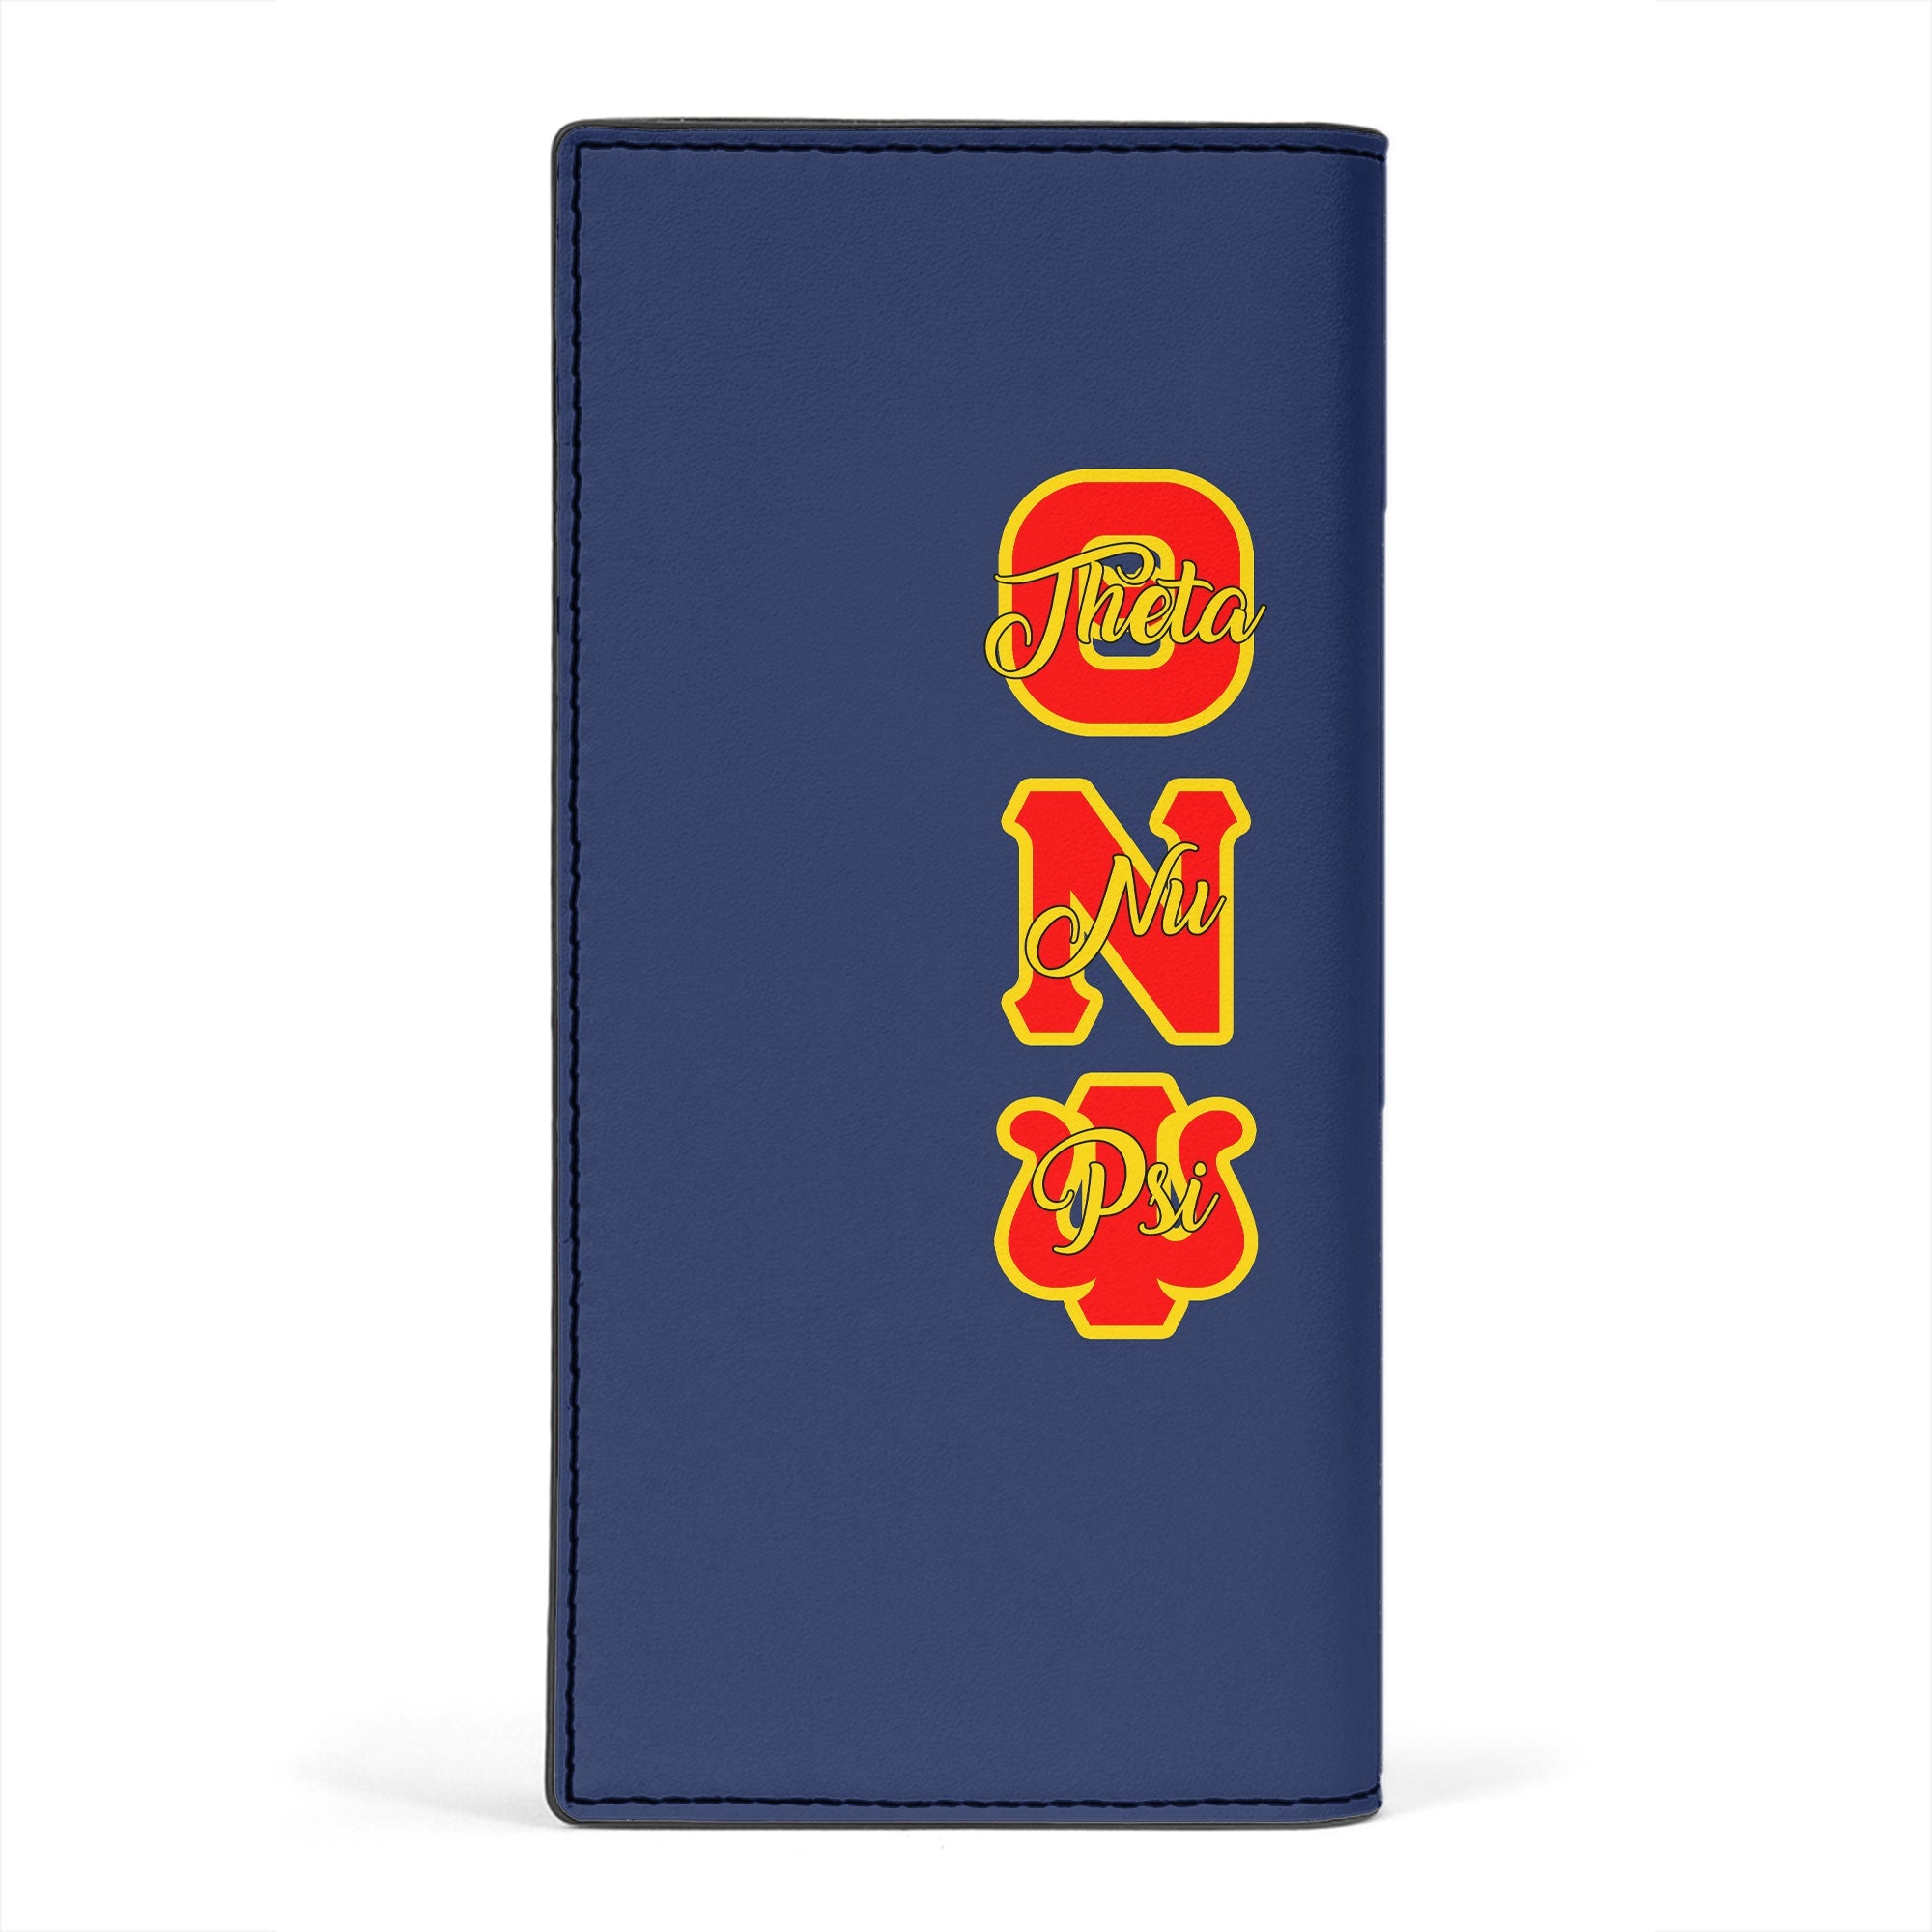 Fraternity Leather Wallet - Theta Nu Psi Leather Wallet Original Blue Style